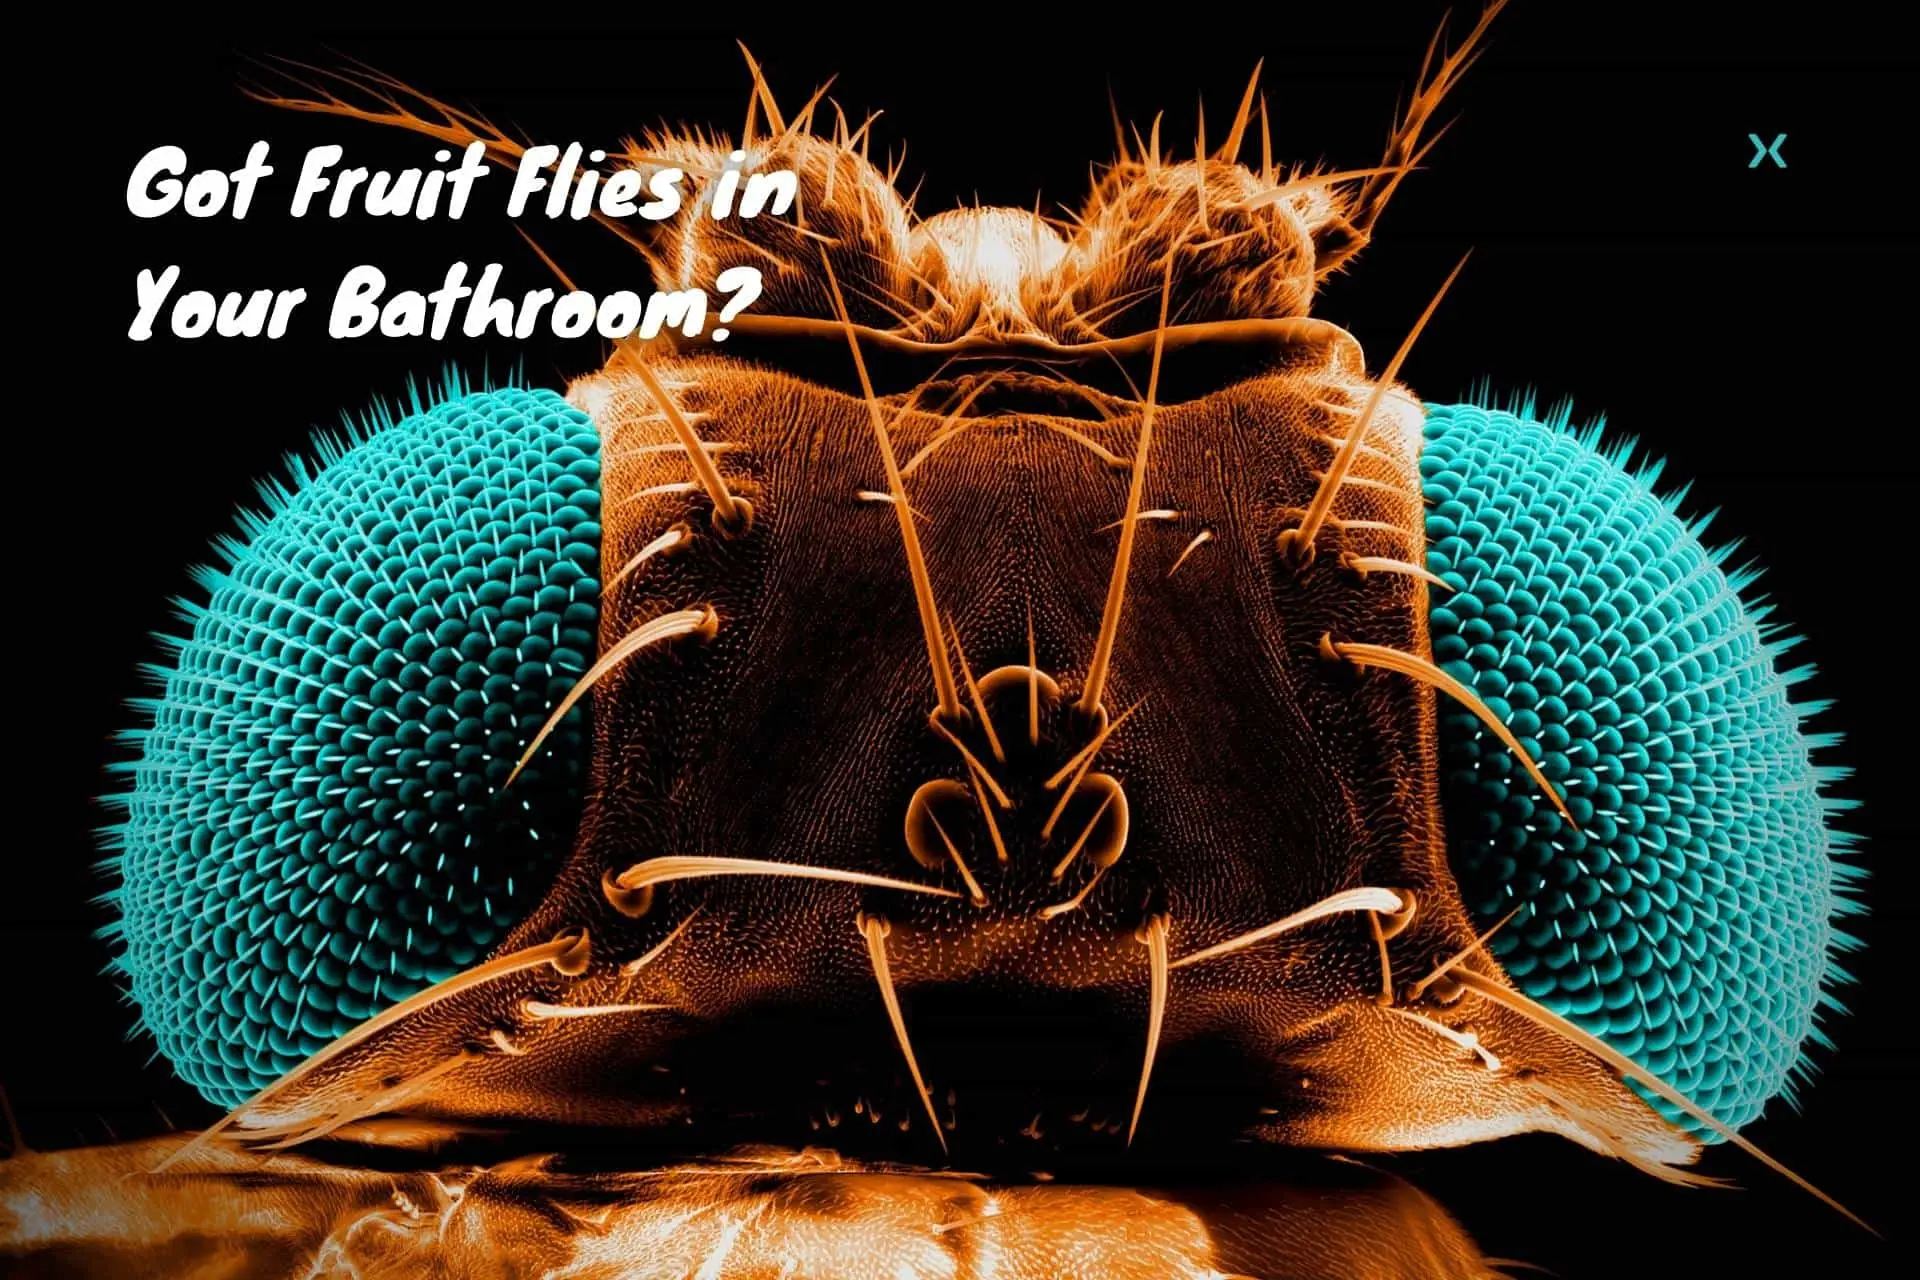 Acquired Fruit Flies in Your Lavatory? This is How To Get Rid of Them!